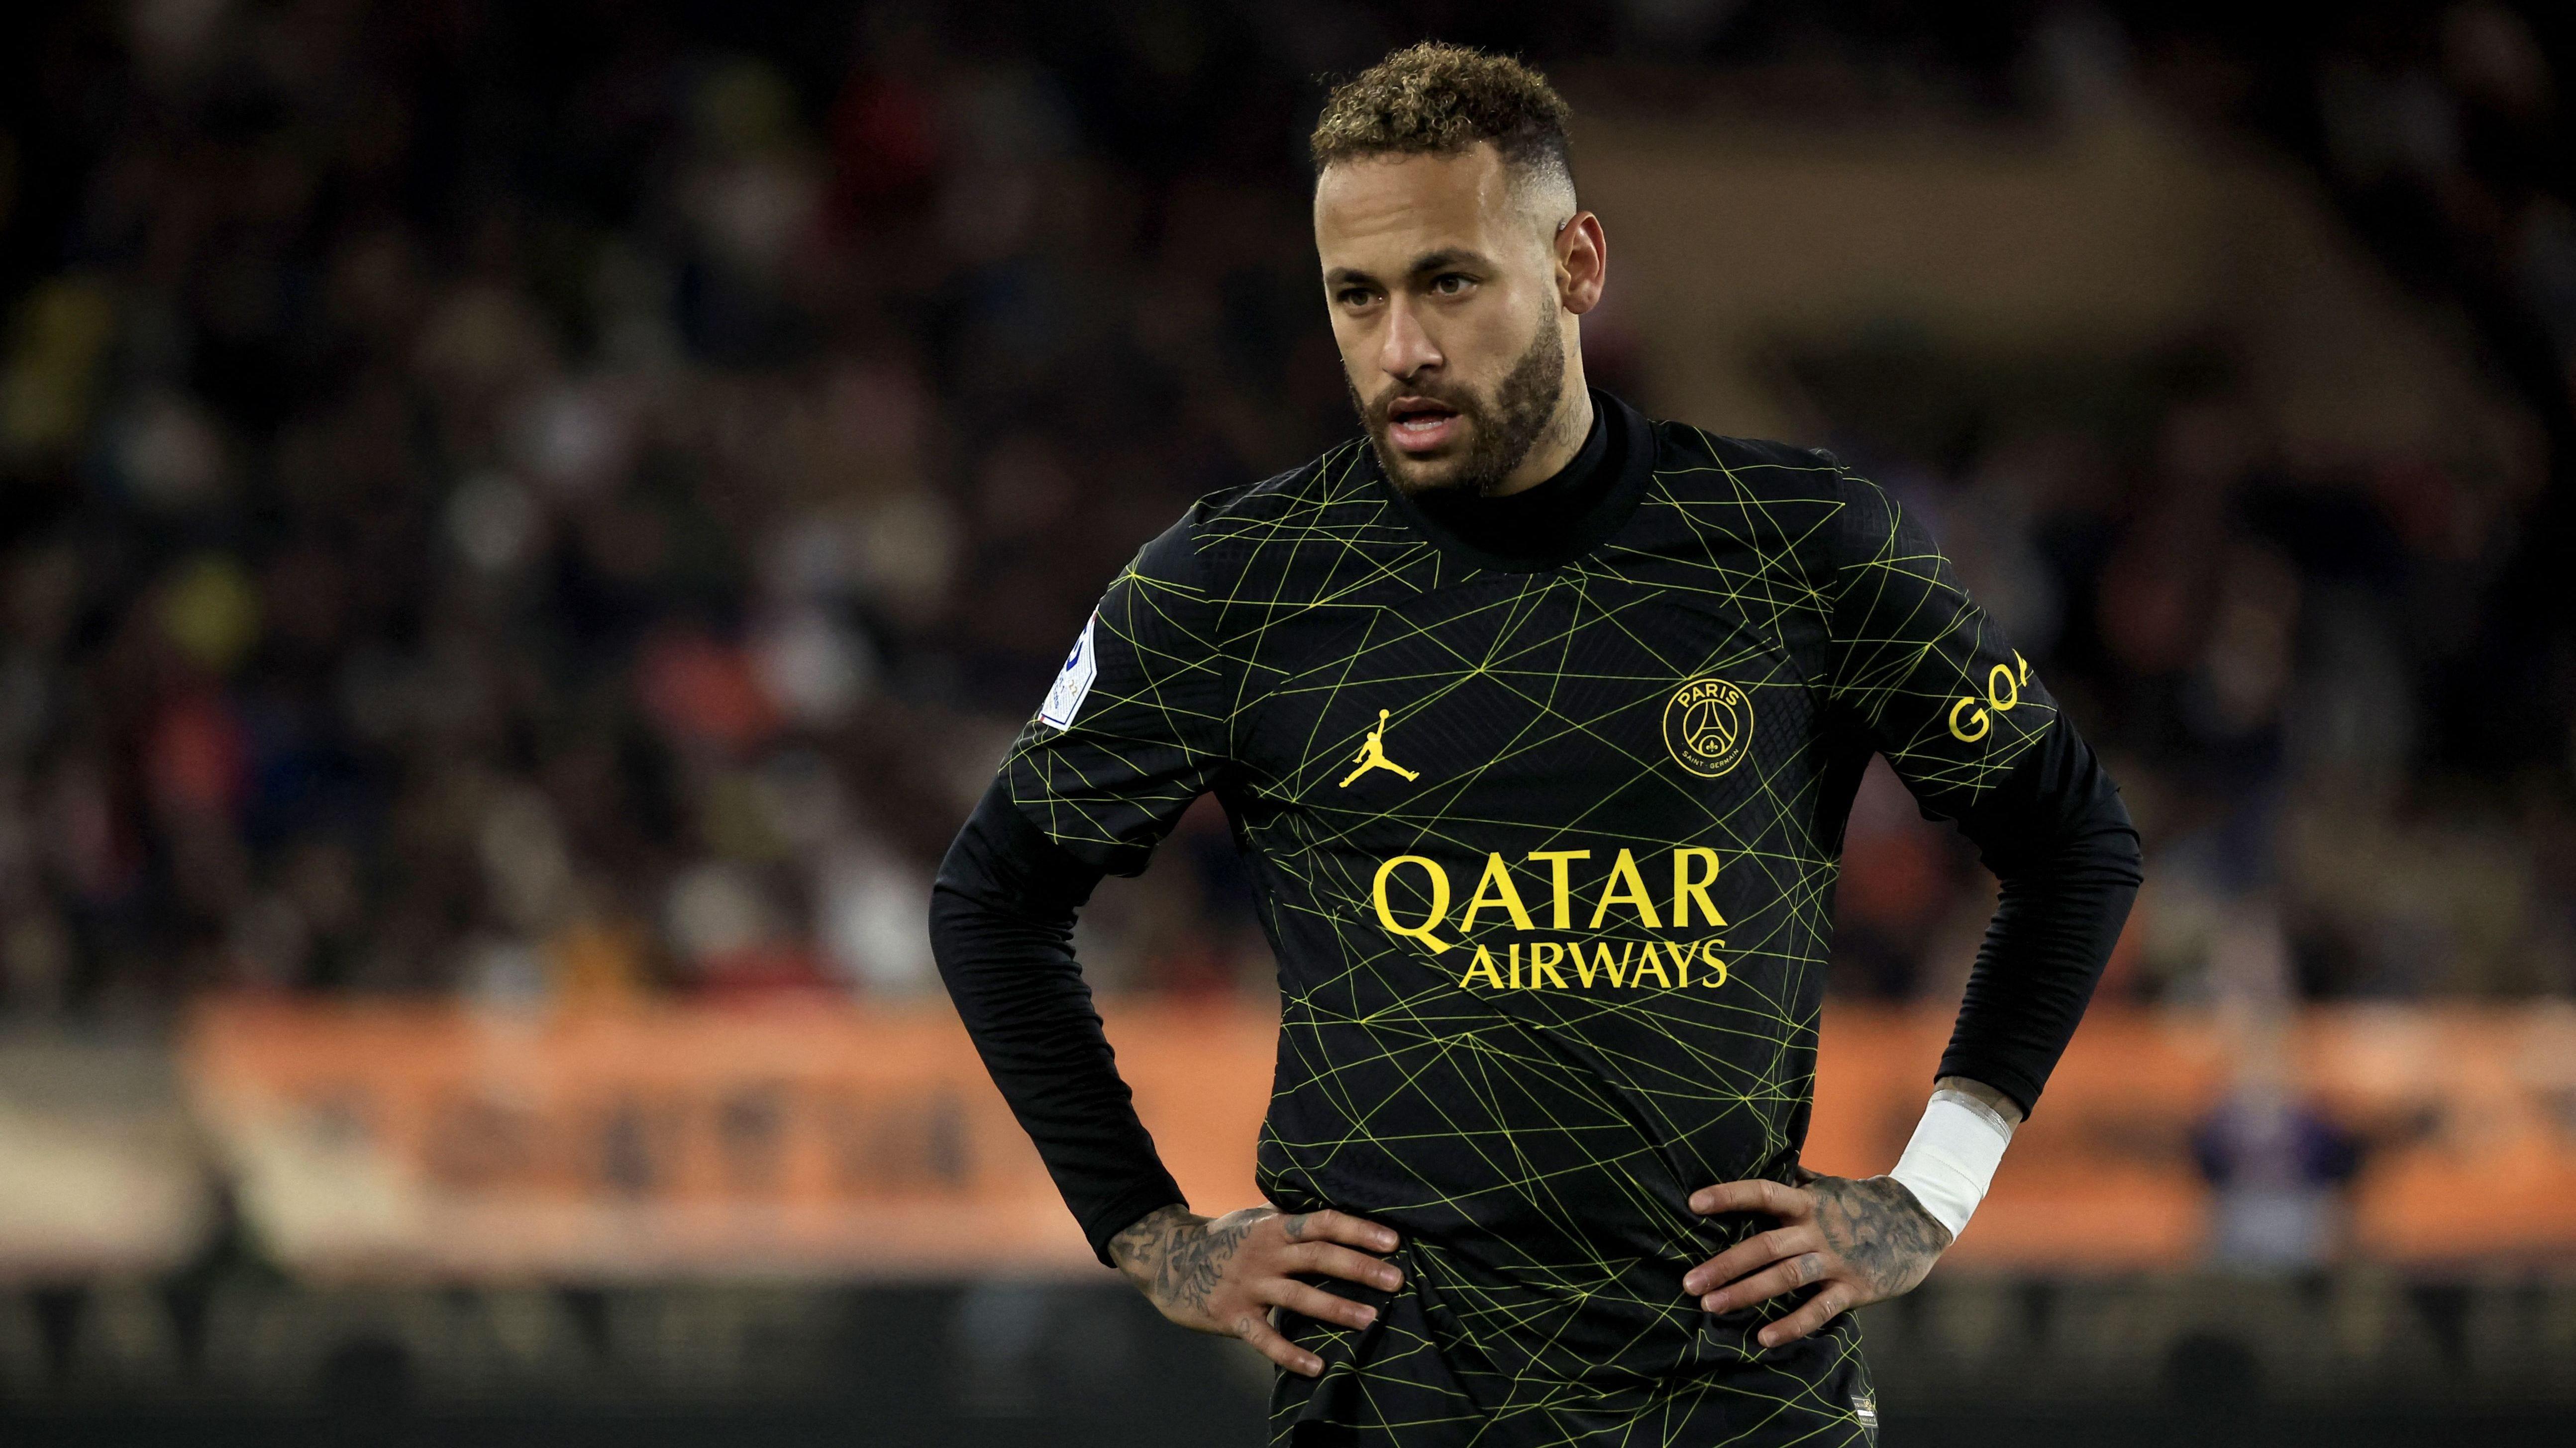 Psg Want Neymar Out Worlds Most Expensive Player To